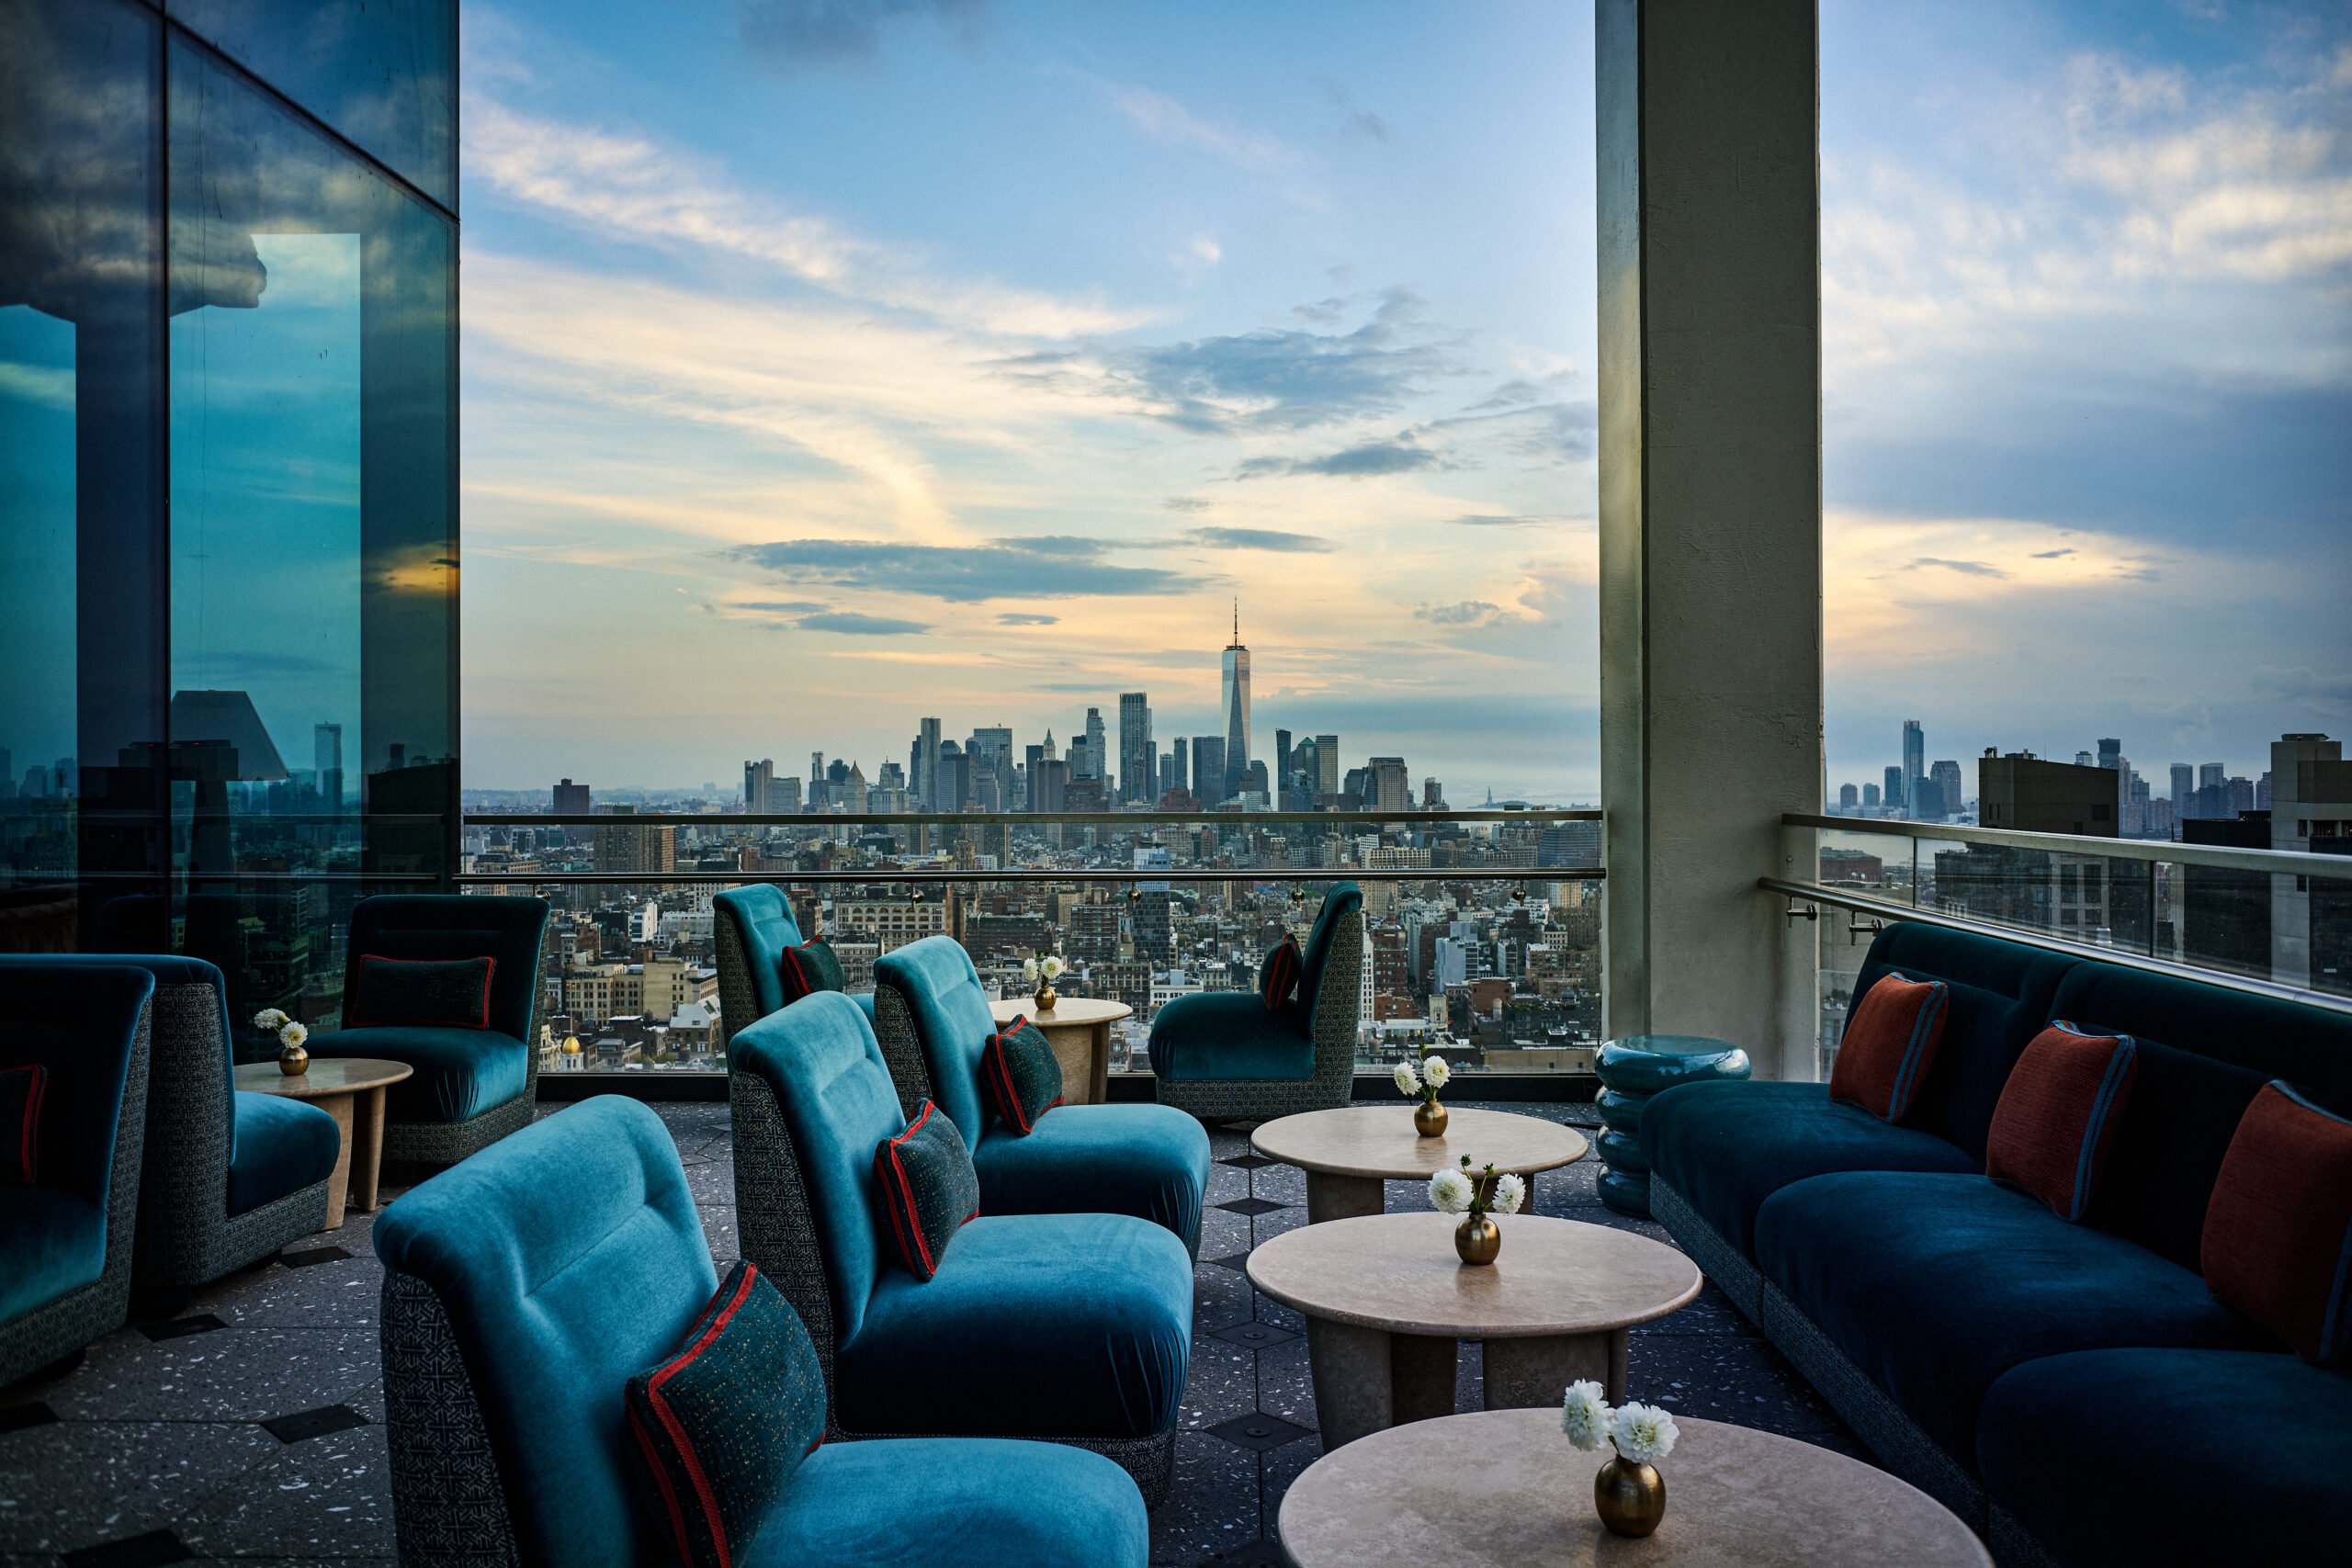 Nubeluz is one of the best rooftop bars in New York City